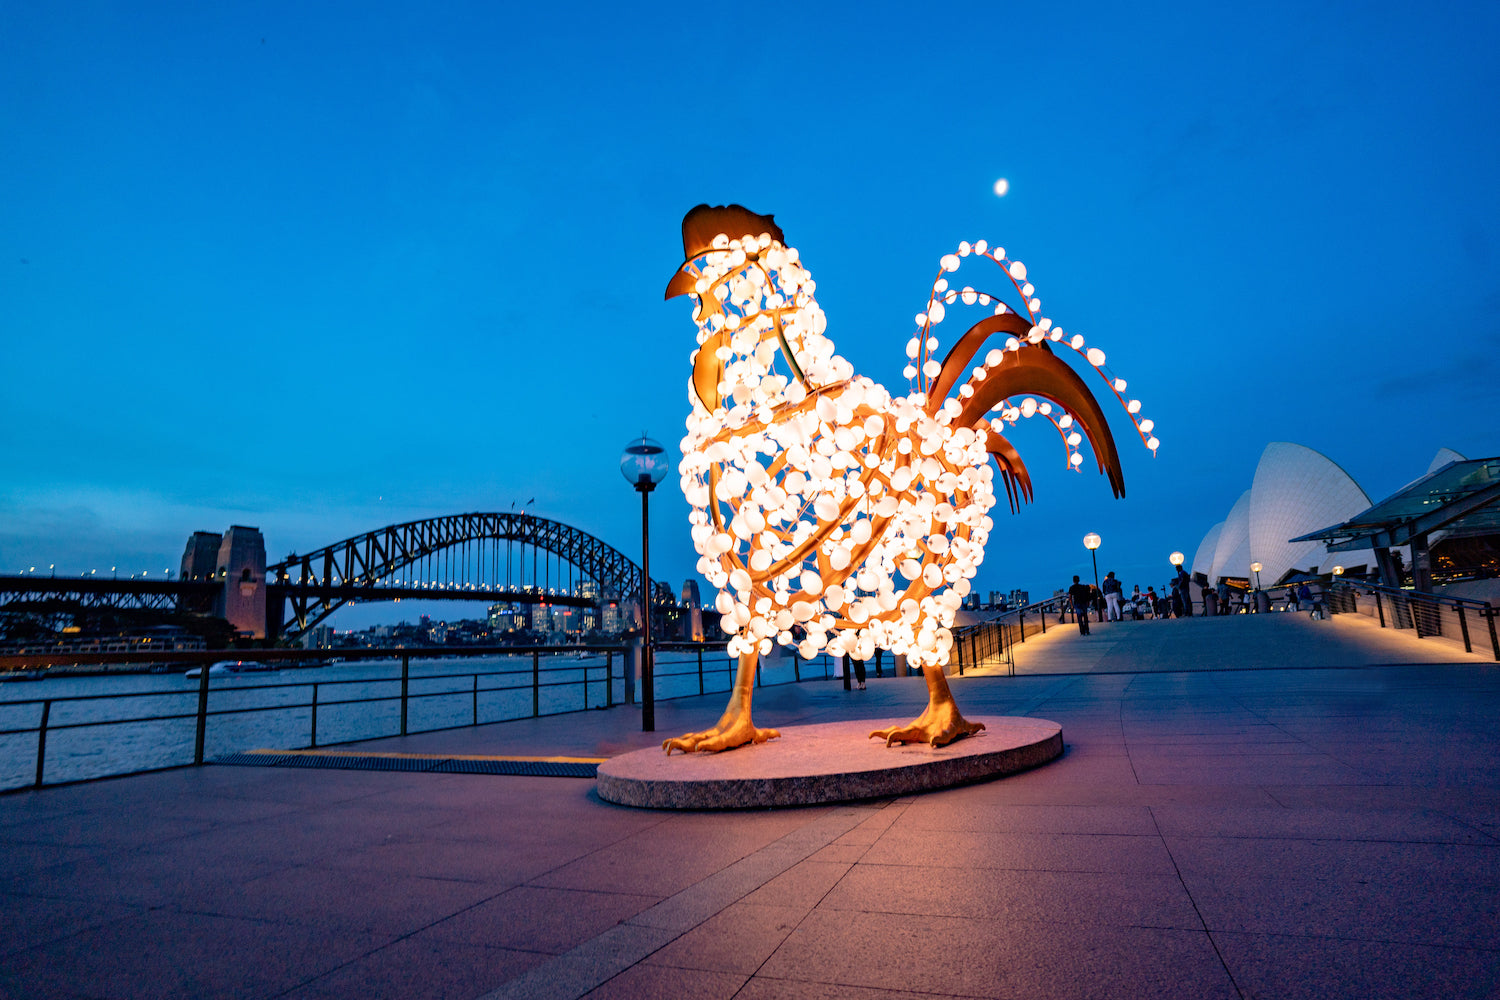 The Rooster art installation by Valerie Khoo